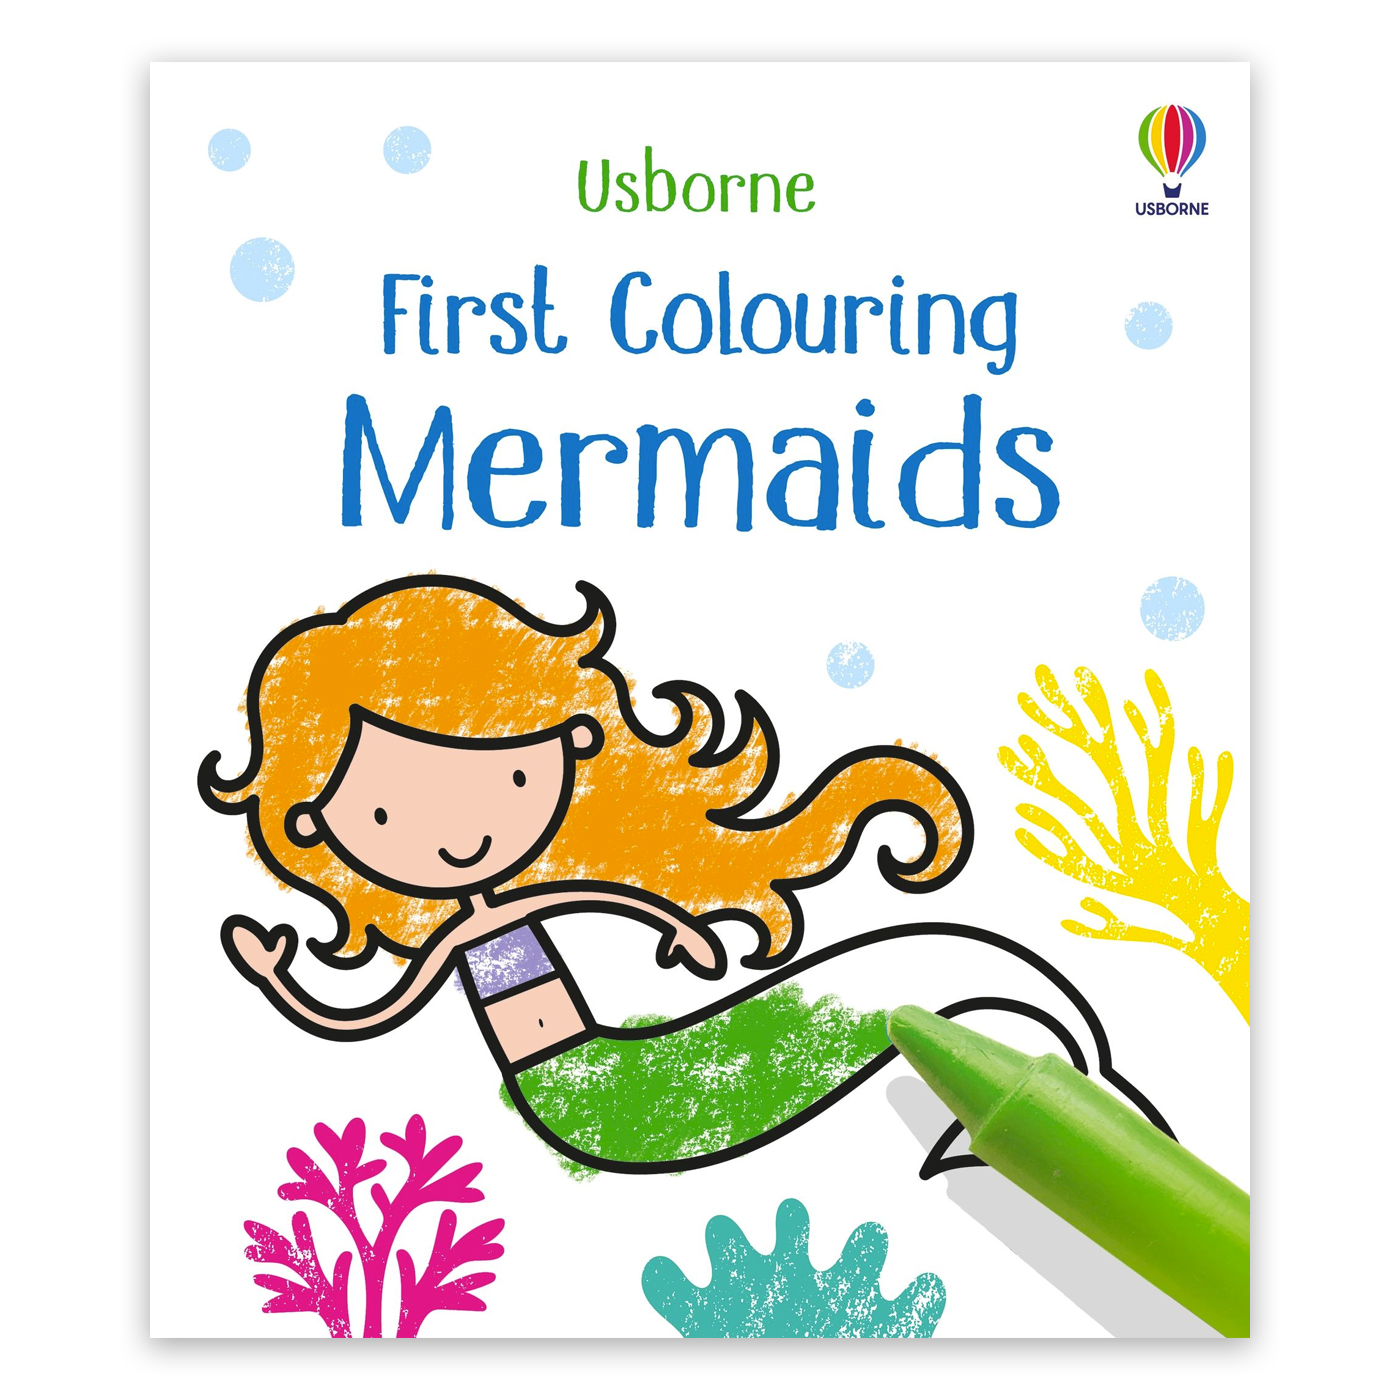  First Colouring Mermaids